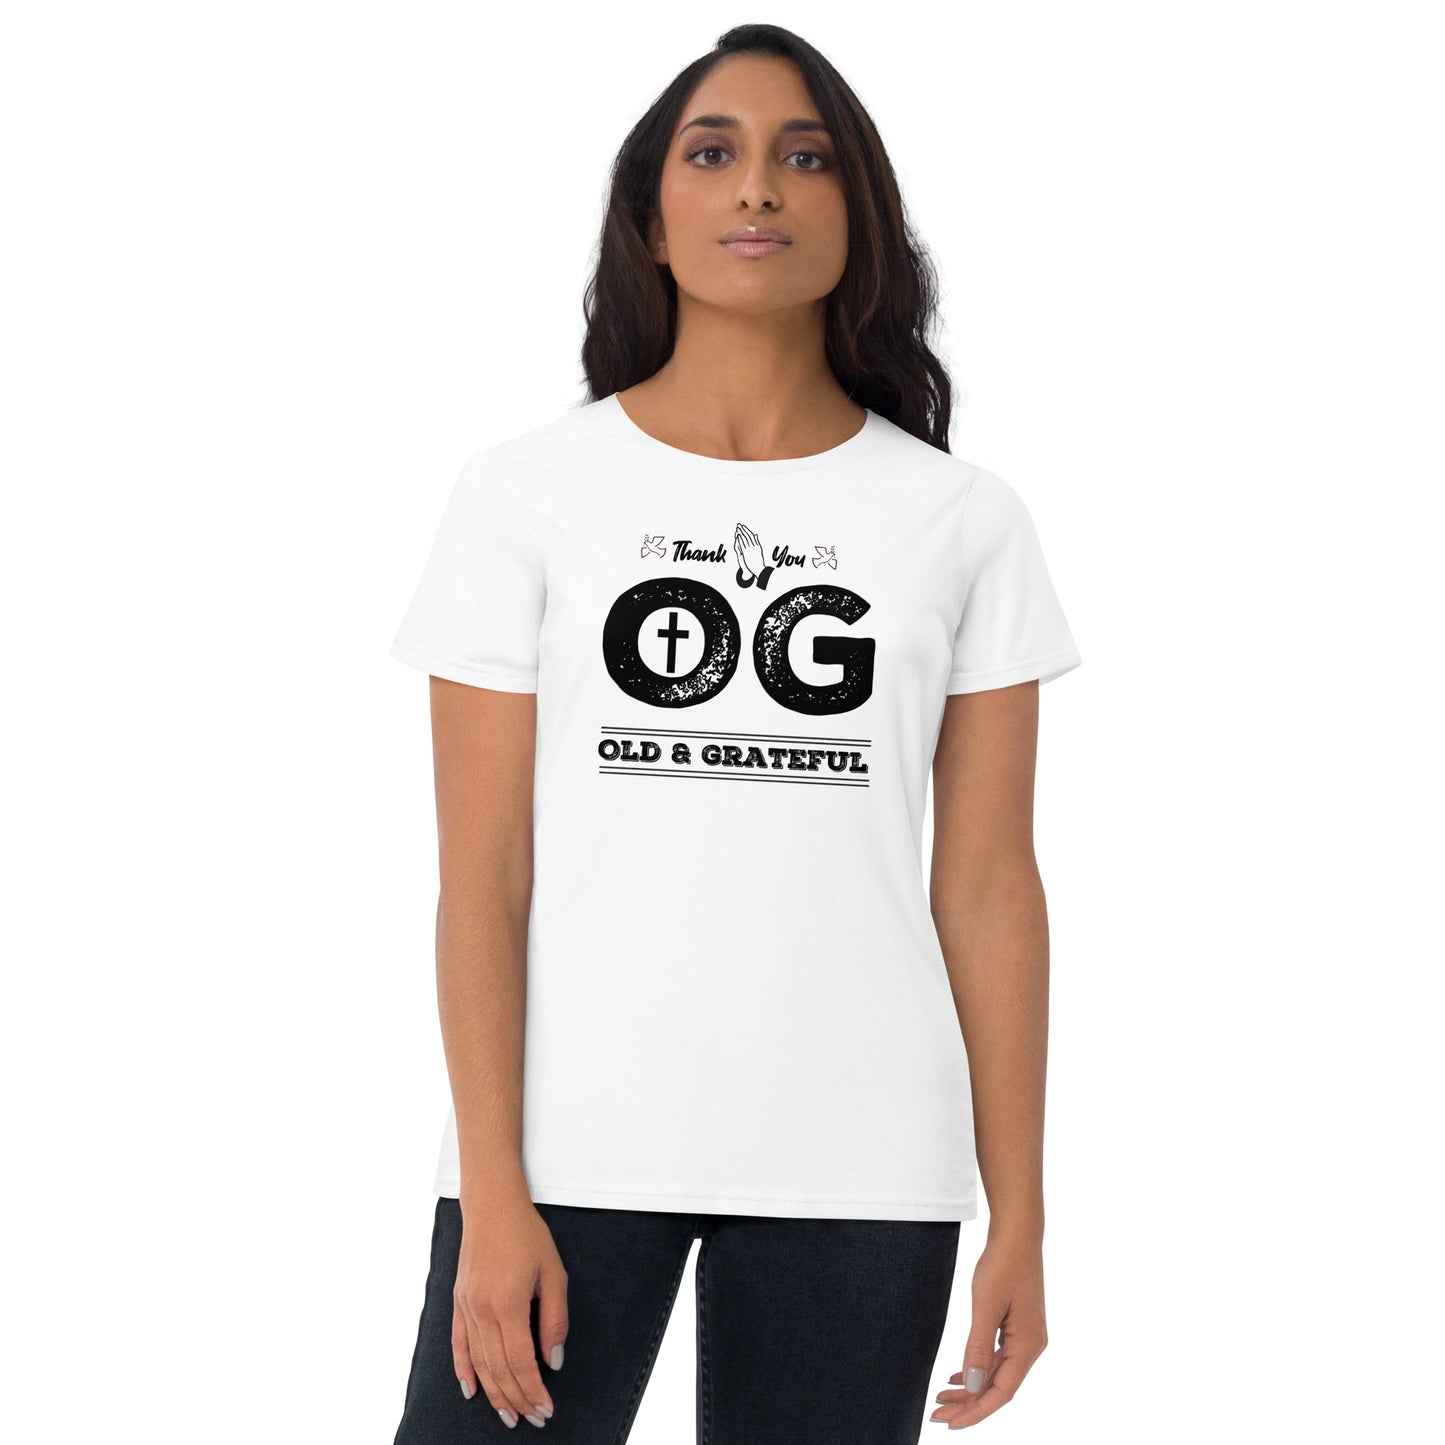 Old and Grateful Women's short sleeve t-shirt